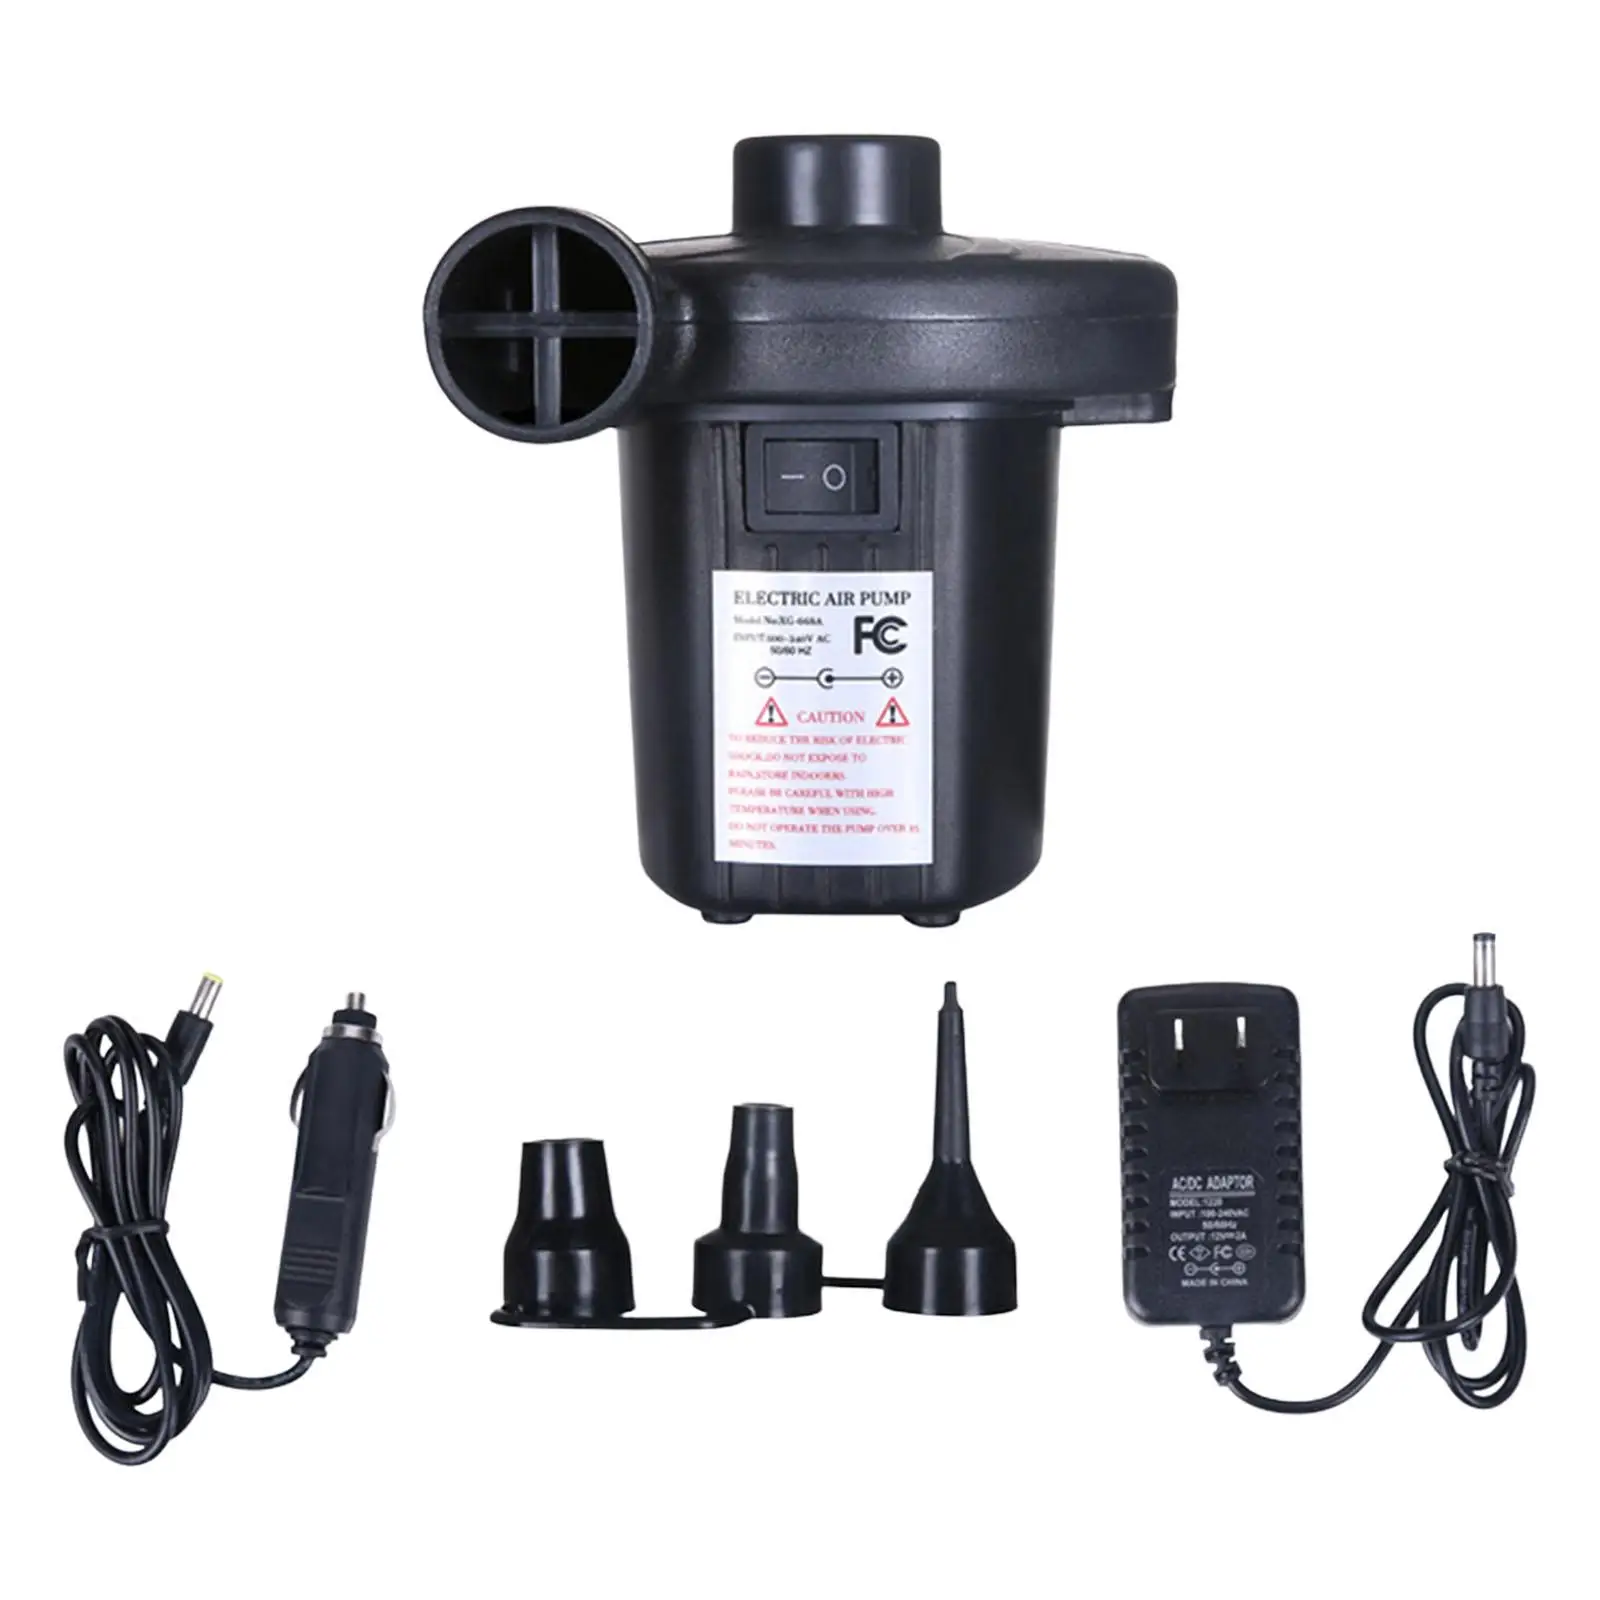 Electric Air Pump Portable with 3 Heads Nozzle 110V AC/12V DC Fast Inflator Deflate for Inflatables Air Beds Outdoor Camping